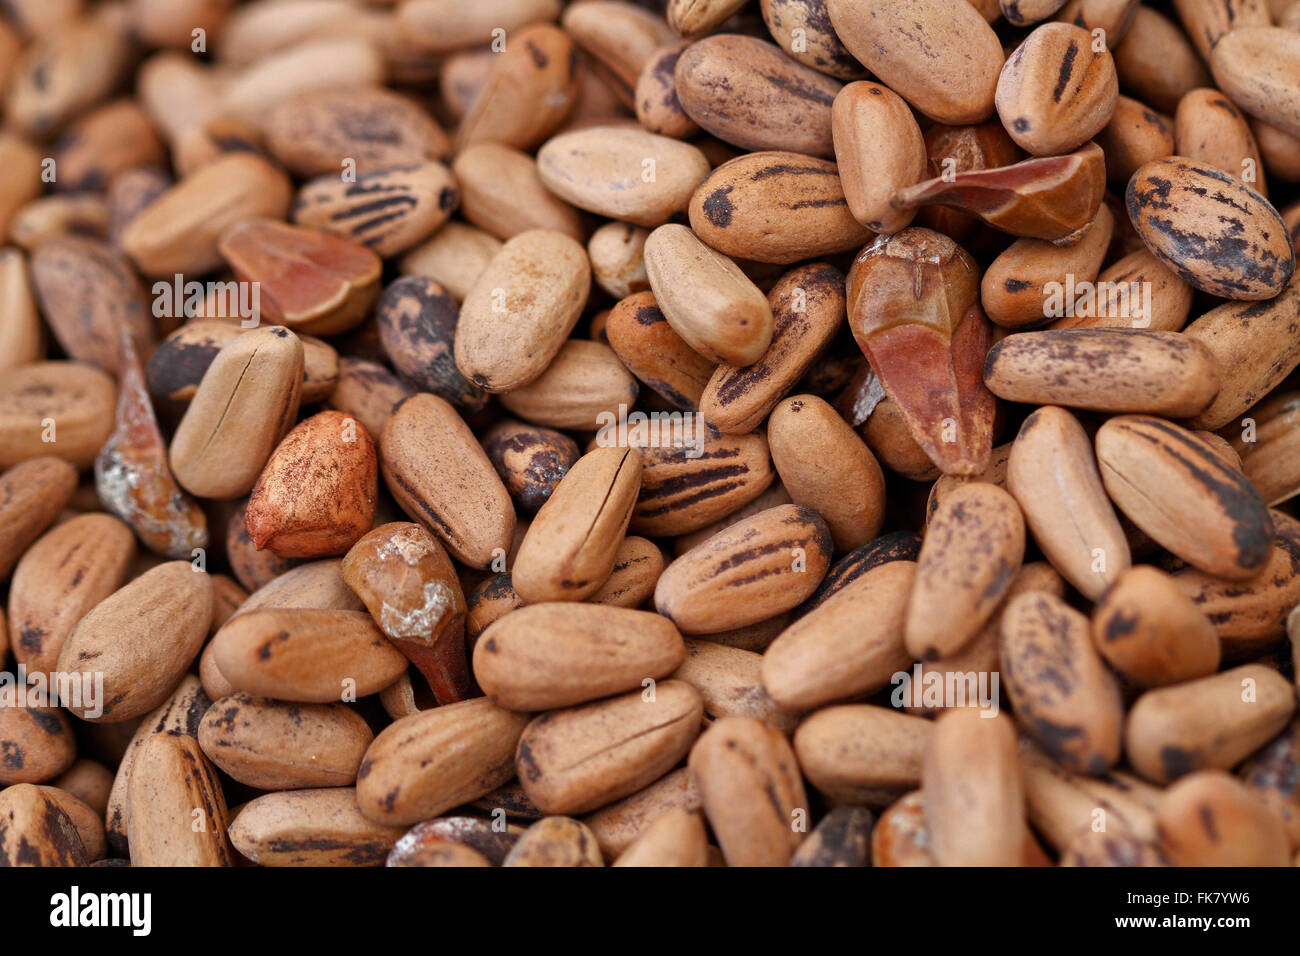 Pine nuts are the edible seeds of pines (family Pinaceae, genus Pinus). Stock Photo